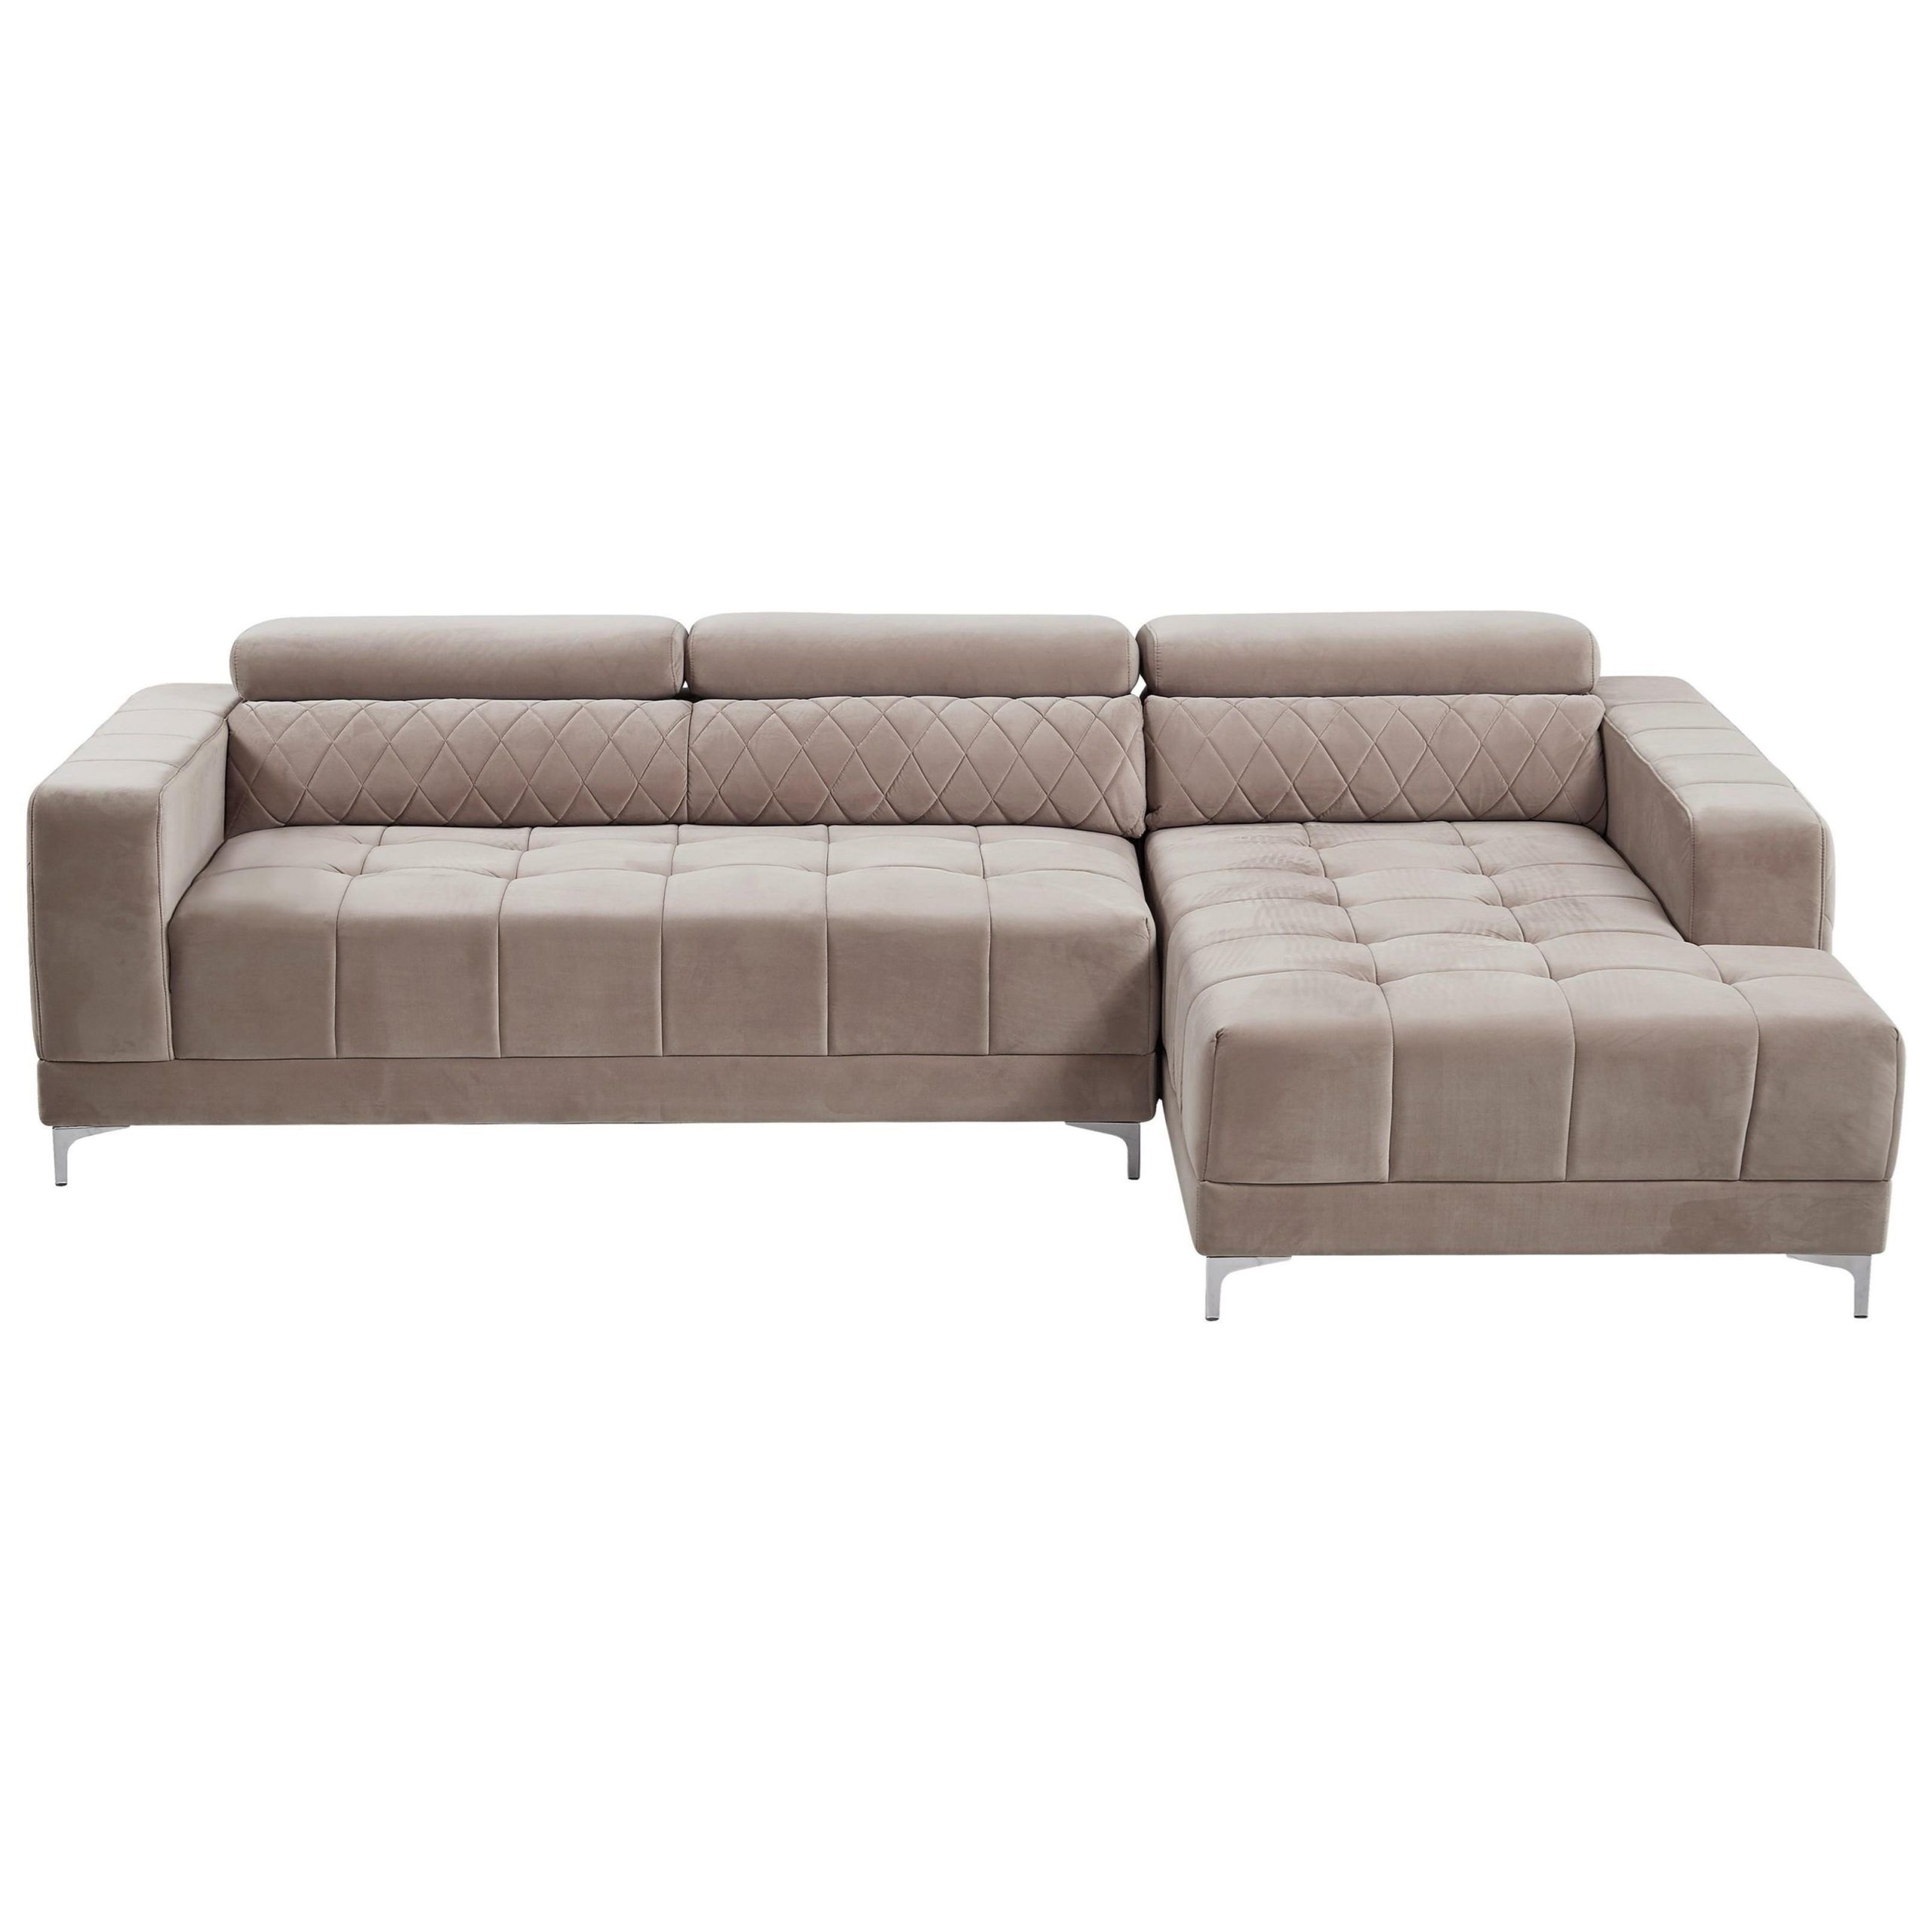 Global Furniture U0037 Contemporary 2 Piece Sectional With Within 2Pc Burland Contemporary Sectional Sofas Charcoal (View 5 of 15)